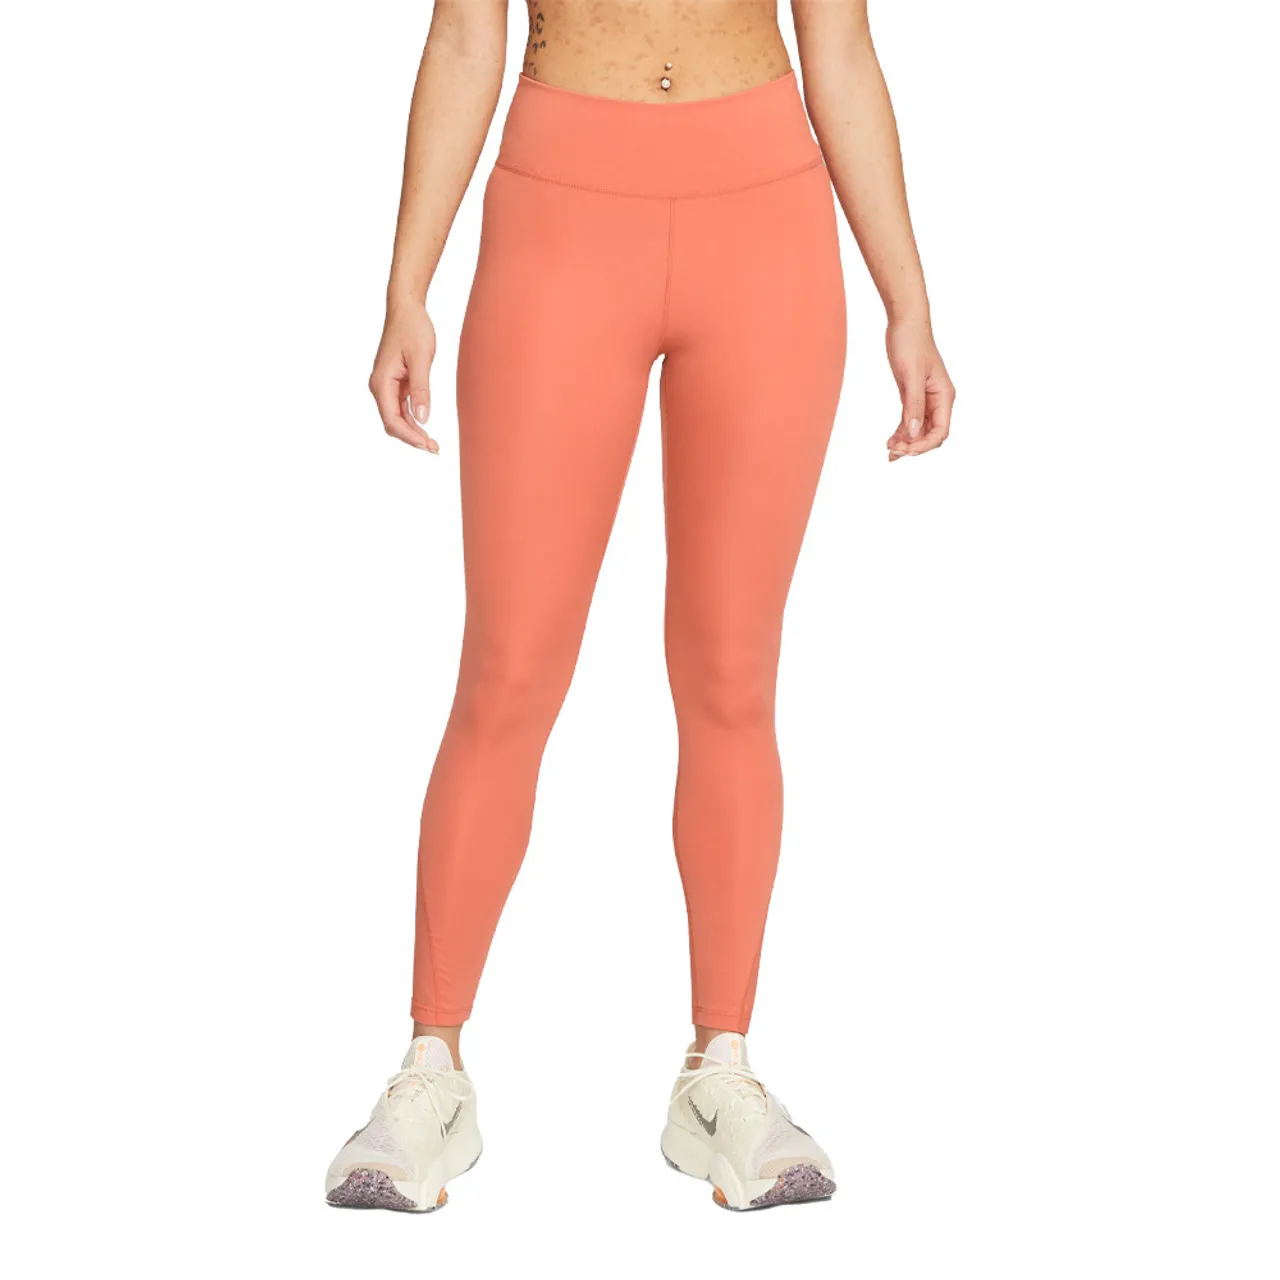 Nike One Mid-Rise 7/8 Women's Tights - SU22